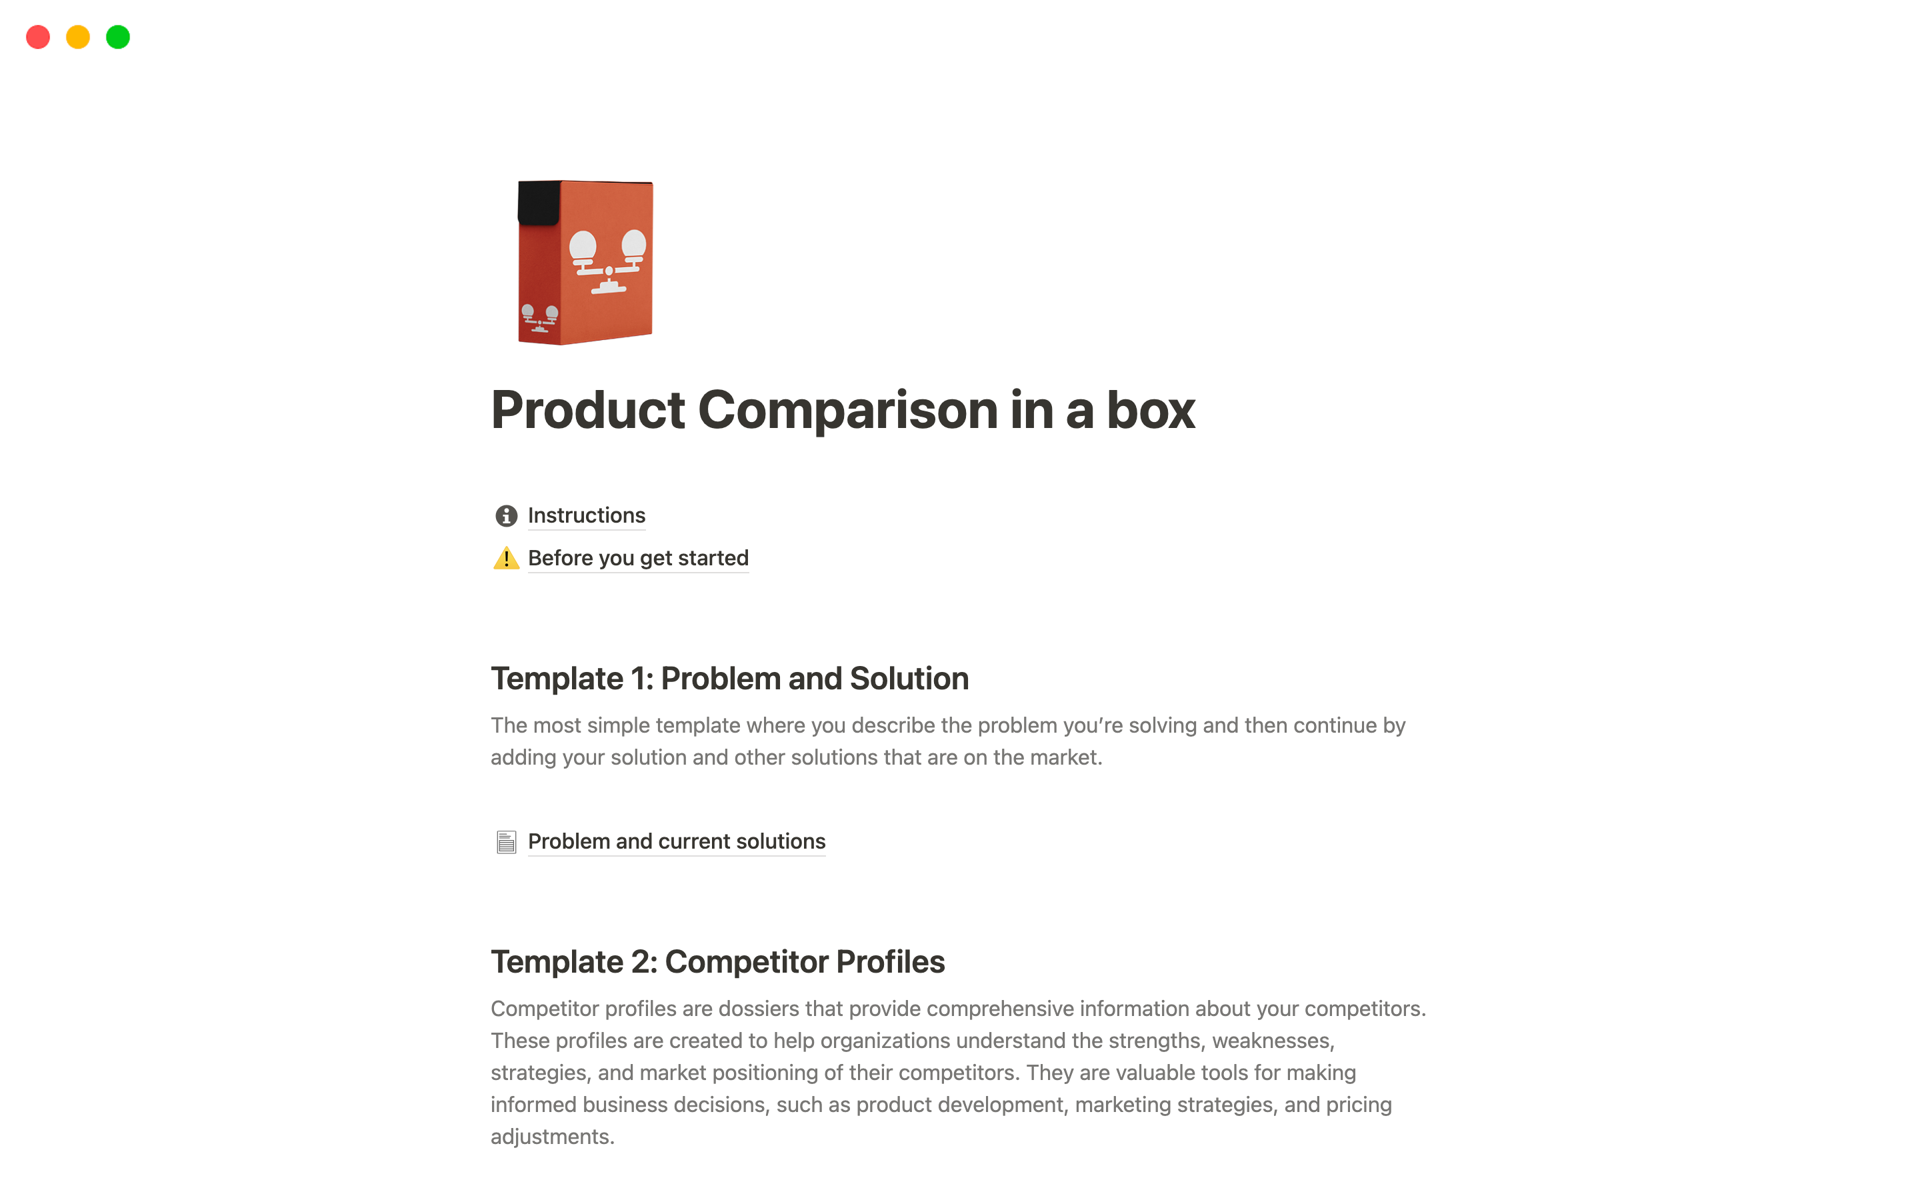 A collection of 5 frameworks designed to facilitate the comparison of your product with competitors.